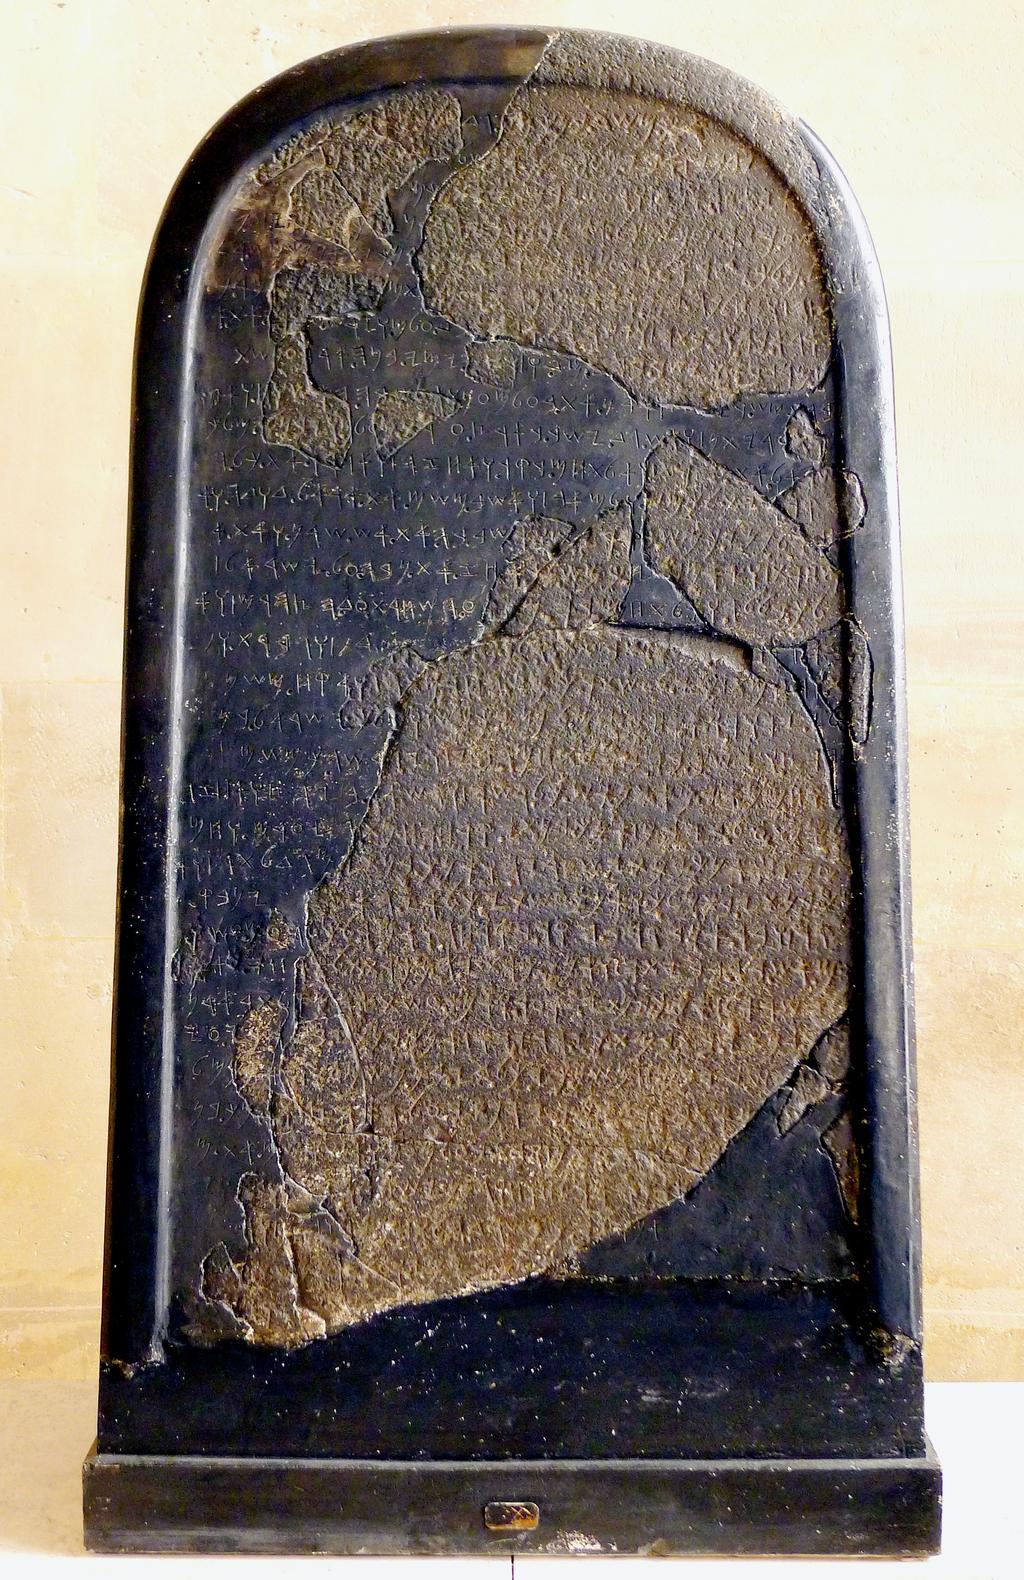 On this stele (inscribed stone), Hazael boasts of his victories over Omri, the king of Israel and his ally Jehu, the king of the House of David.